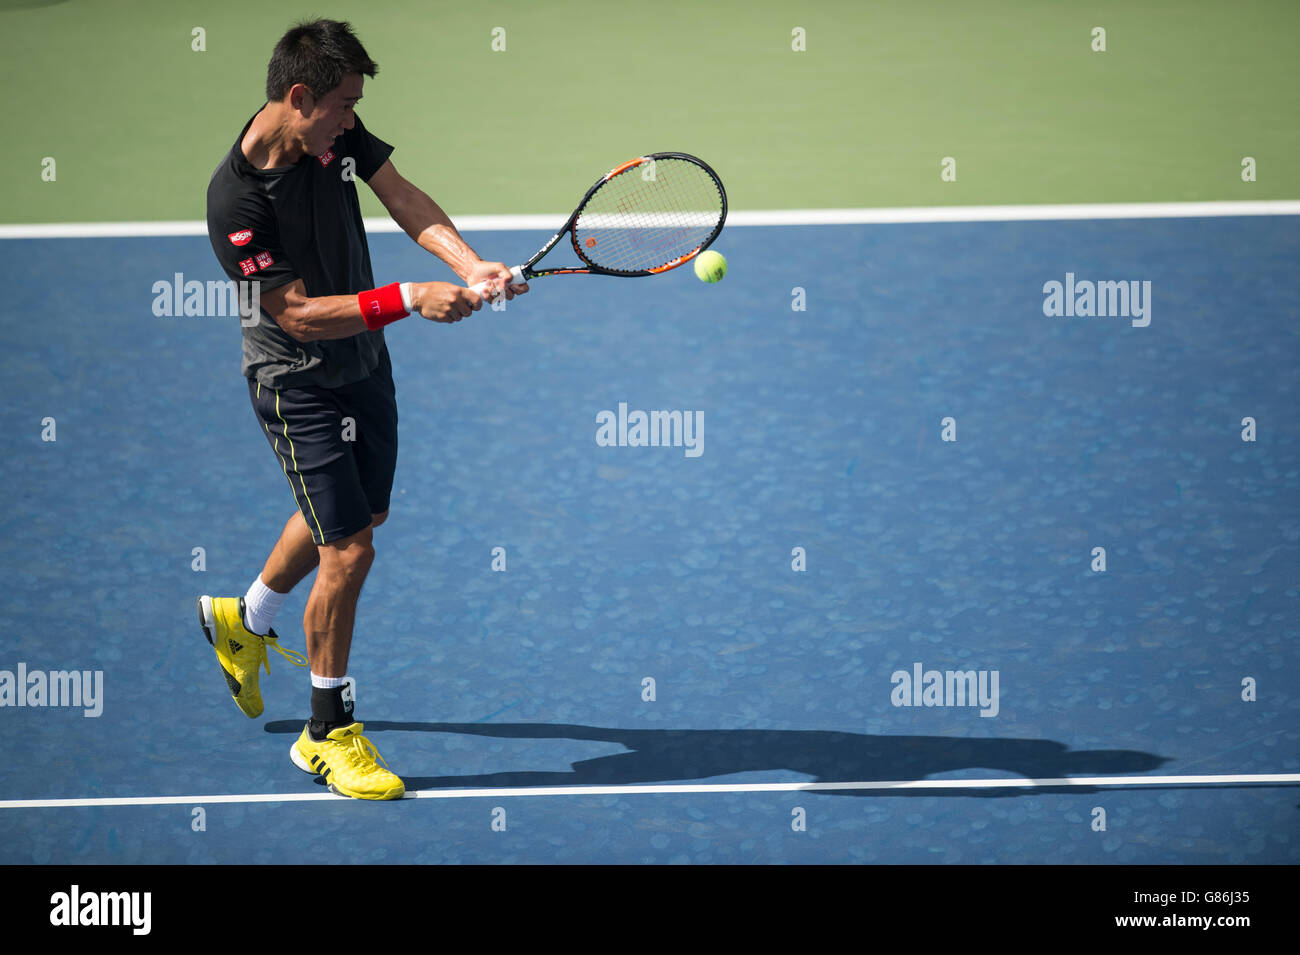 Tennis - US Open - Preview Day One - Billie Jean King National Tennis Center 2015 Stockfoto